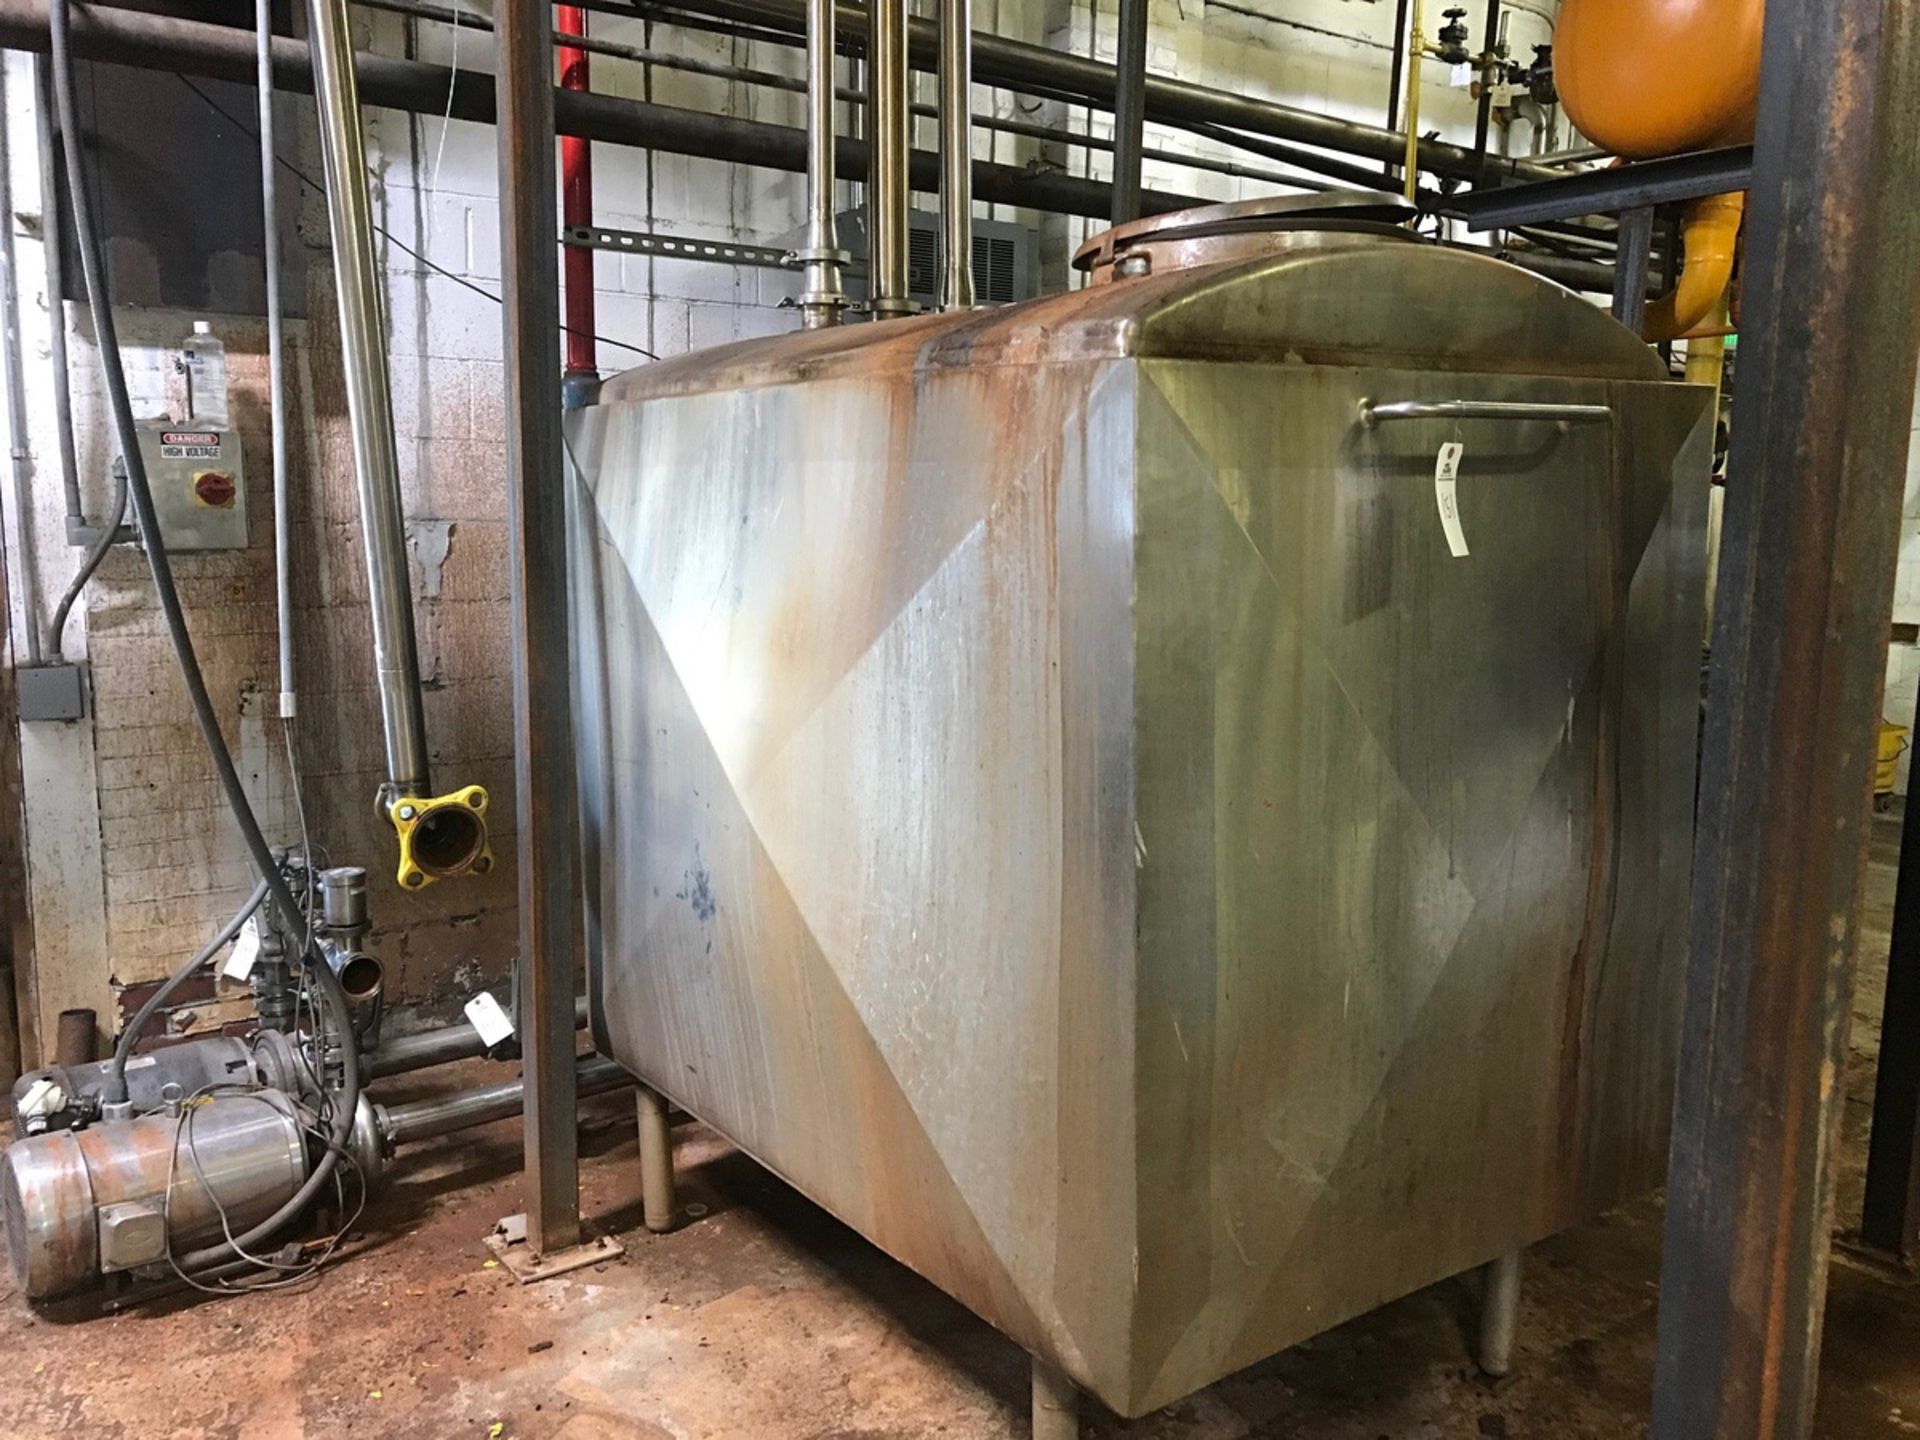 Stainless Steel Rectangular Tank, Approx 44in x 48in x 65in | Rig Fee $1500